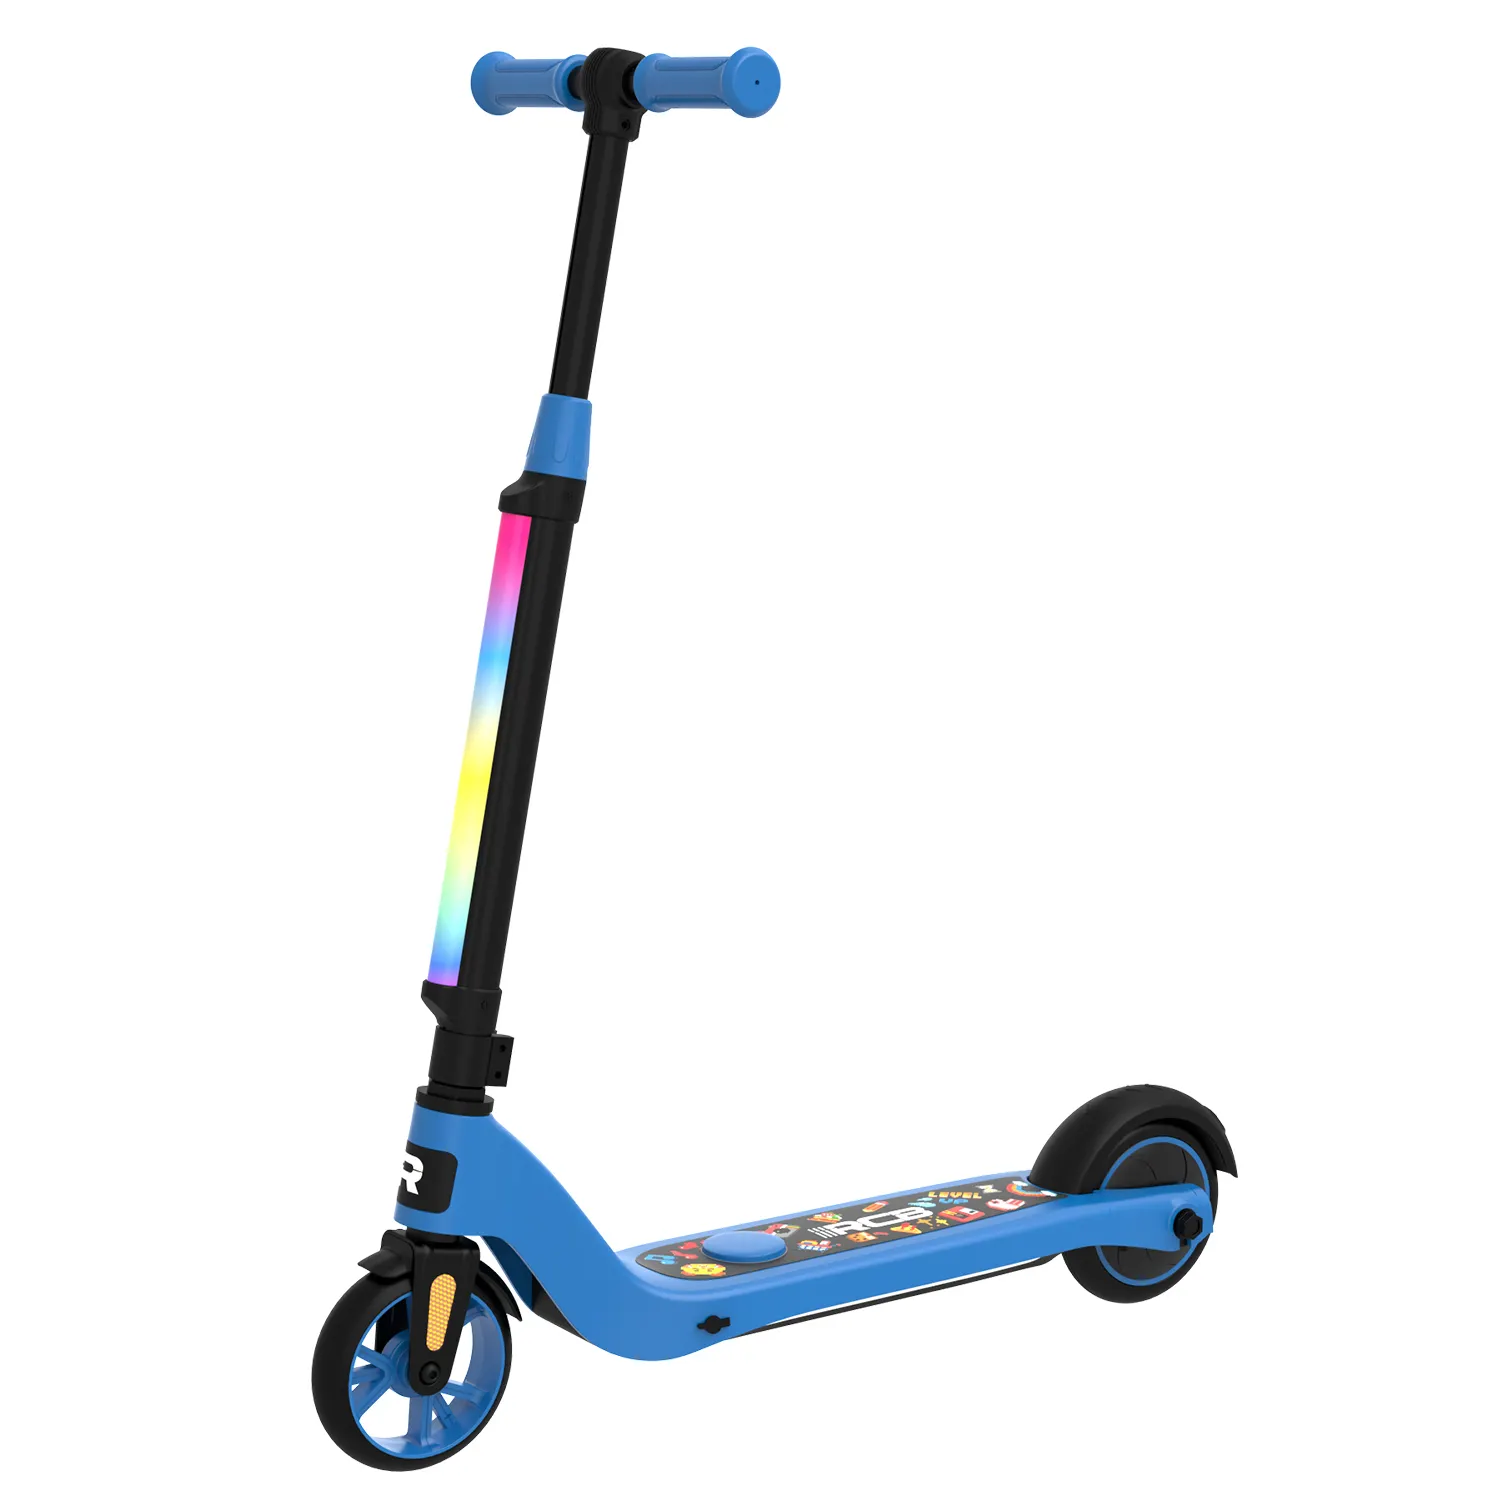 E-kid Scooter Electric Bike Scooter for Adults, Self-balancing 2 Wheel Mobility Foot Scooter with EU Warehouses, 80W, 8KM/H